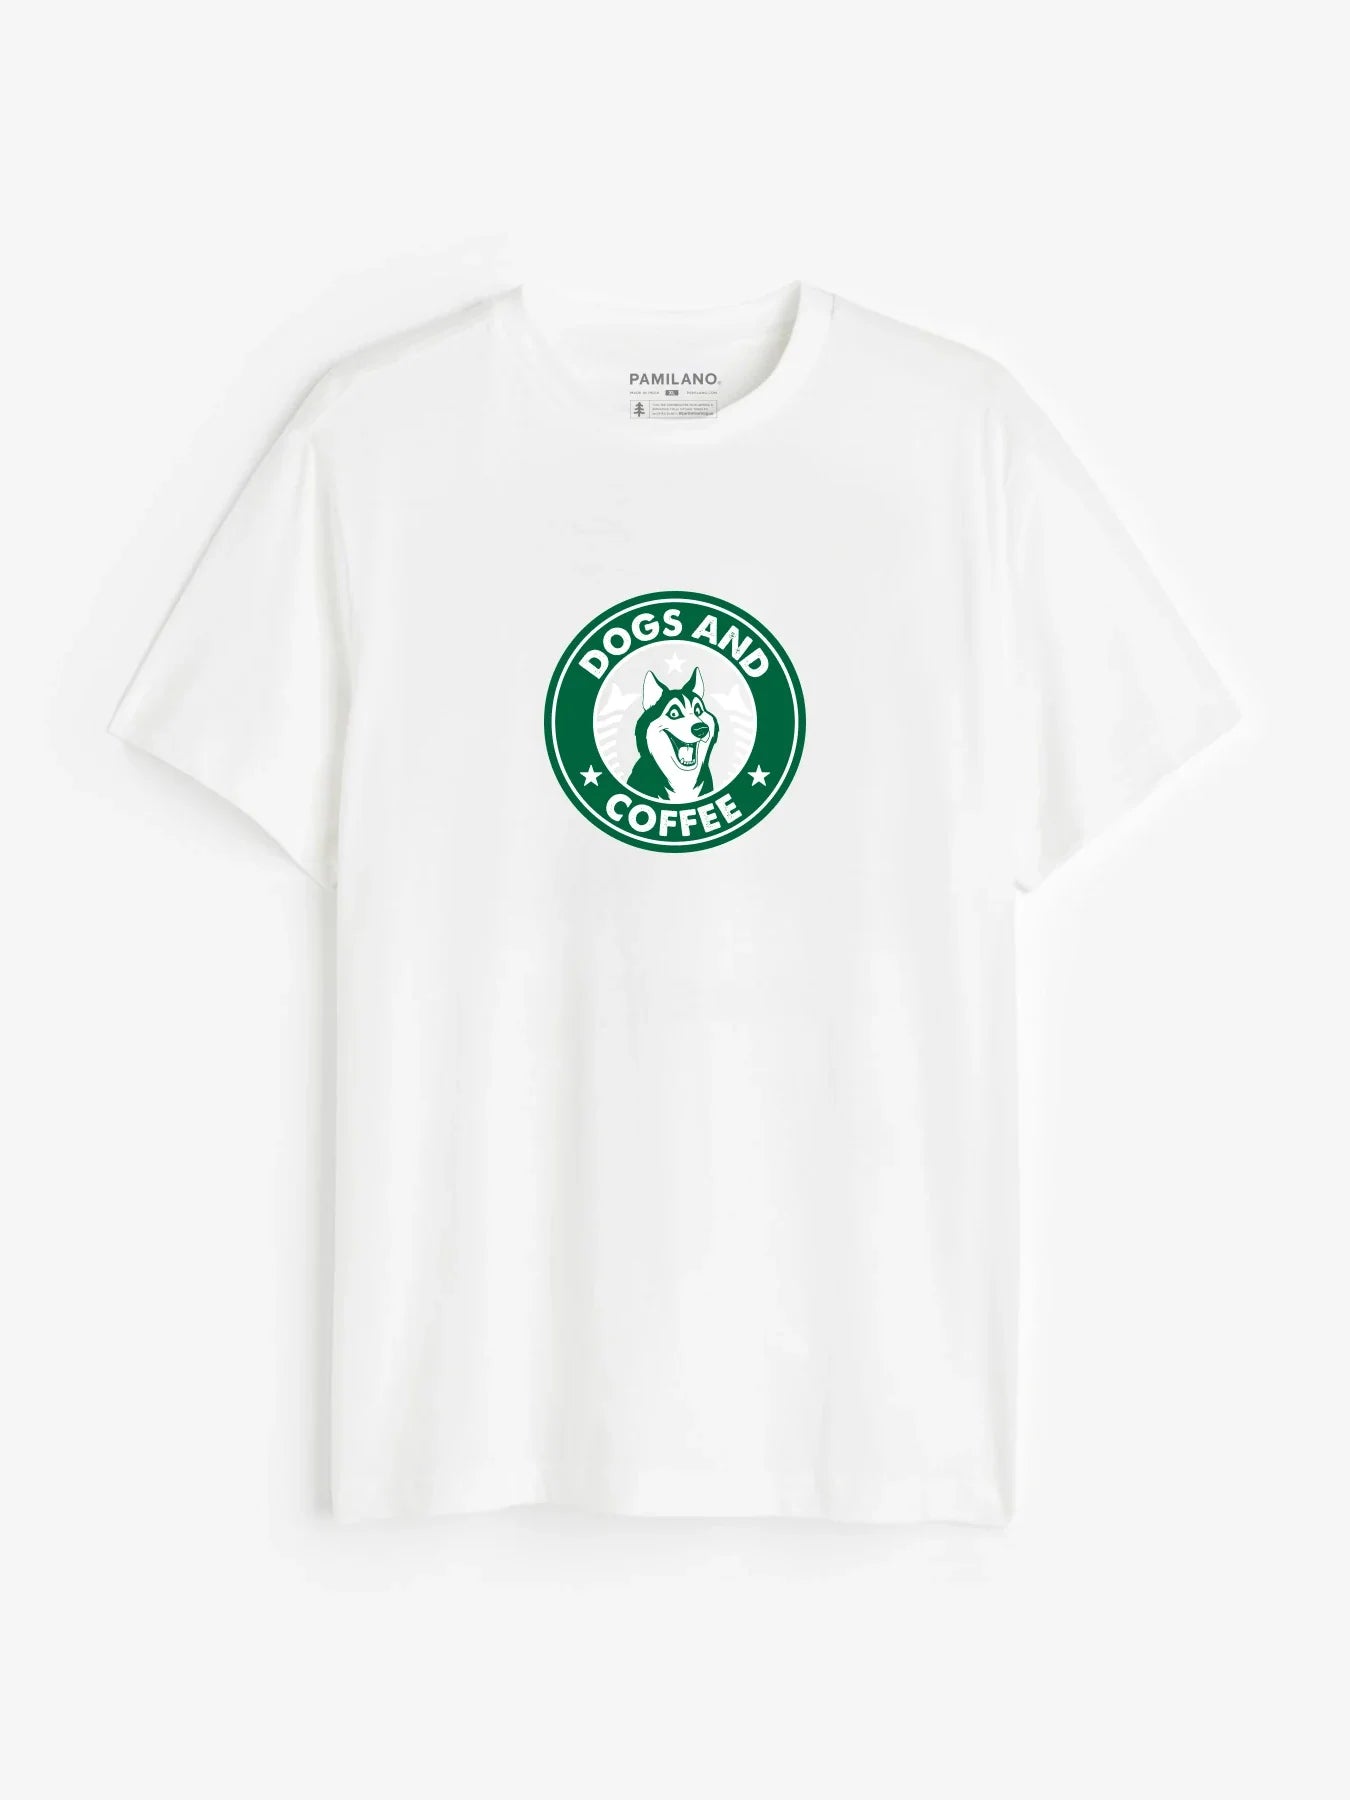 Dogs and Coffee - Unisex T-Shirt